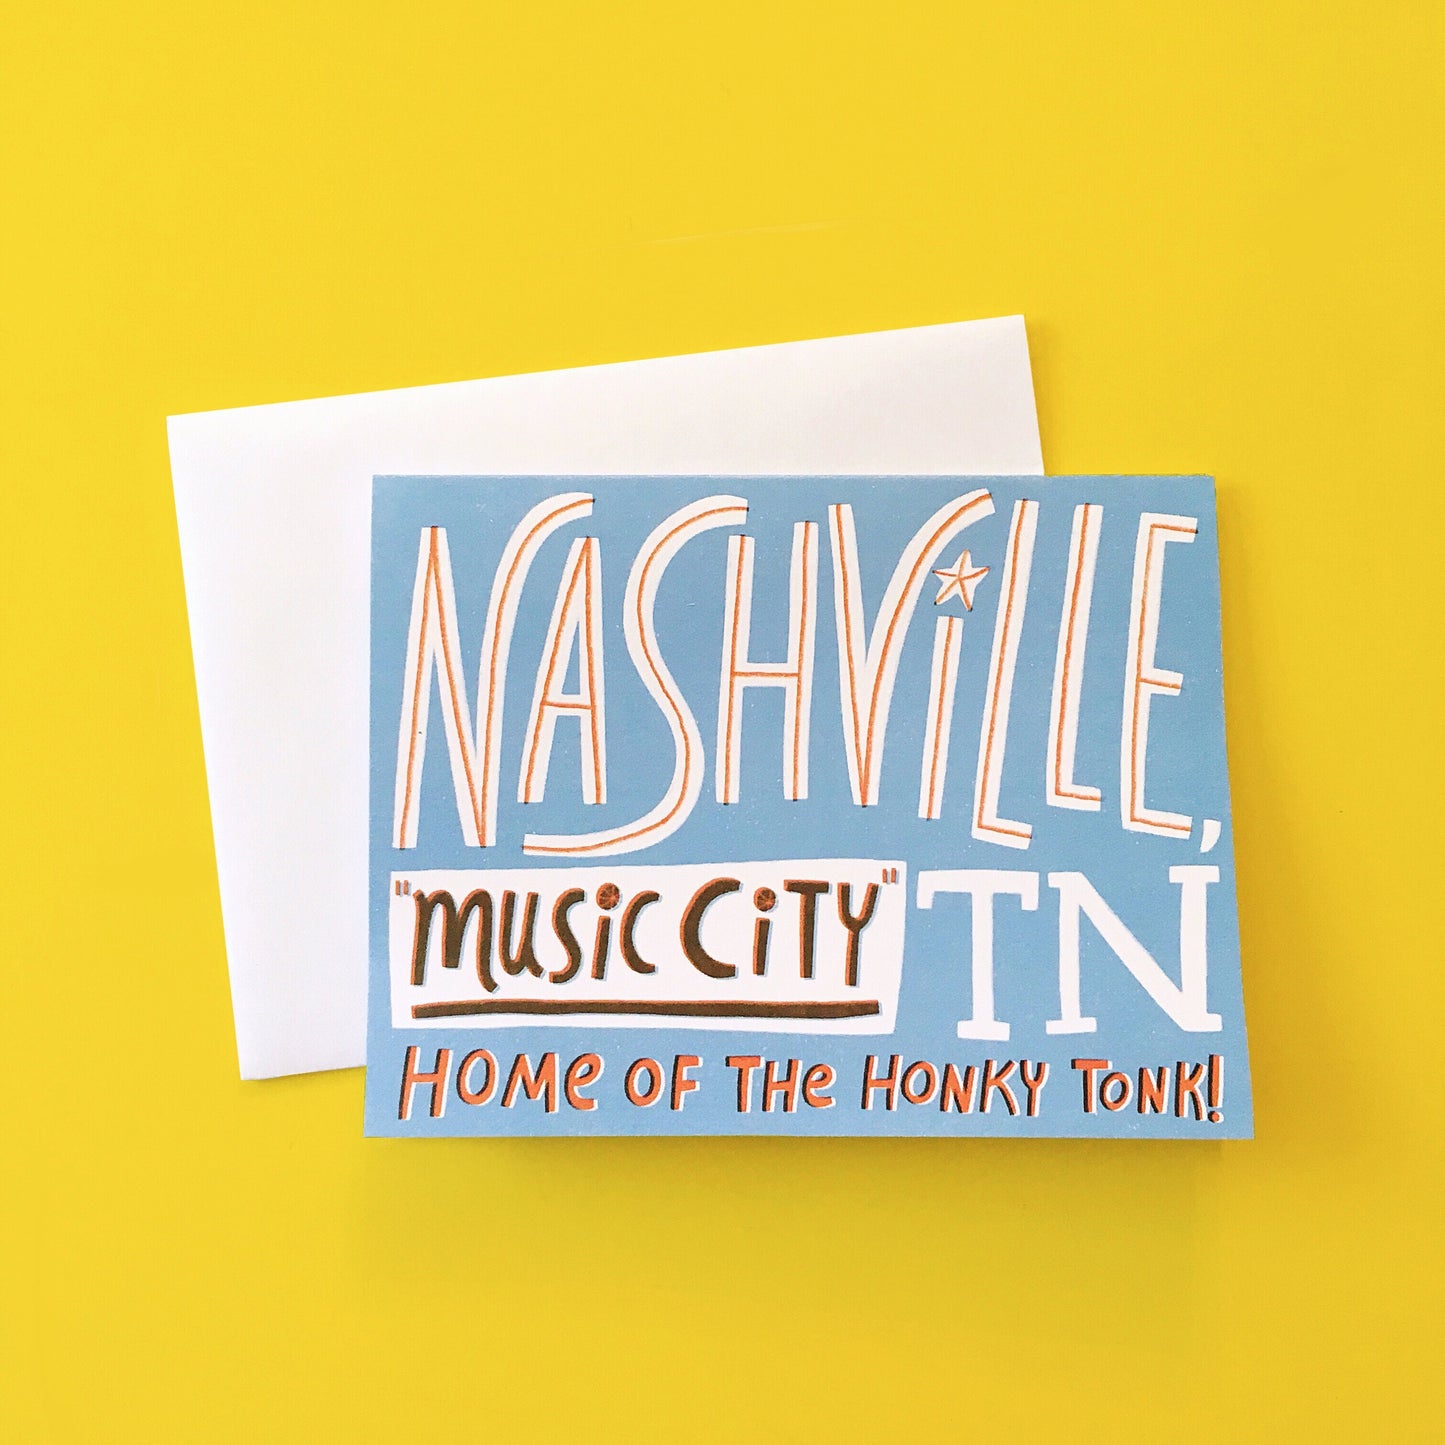 Nashville, Tennessee Music City Greeting Card